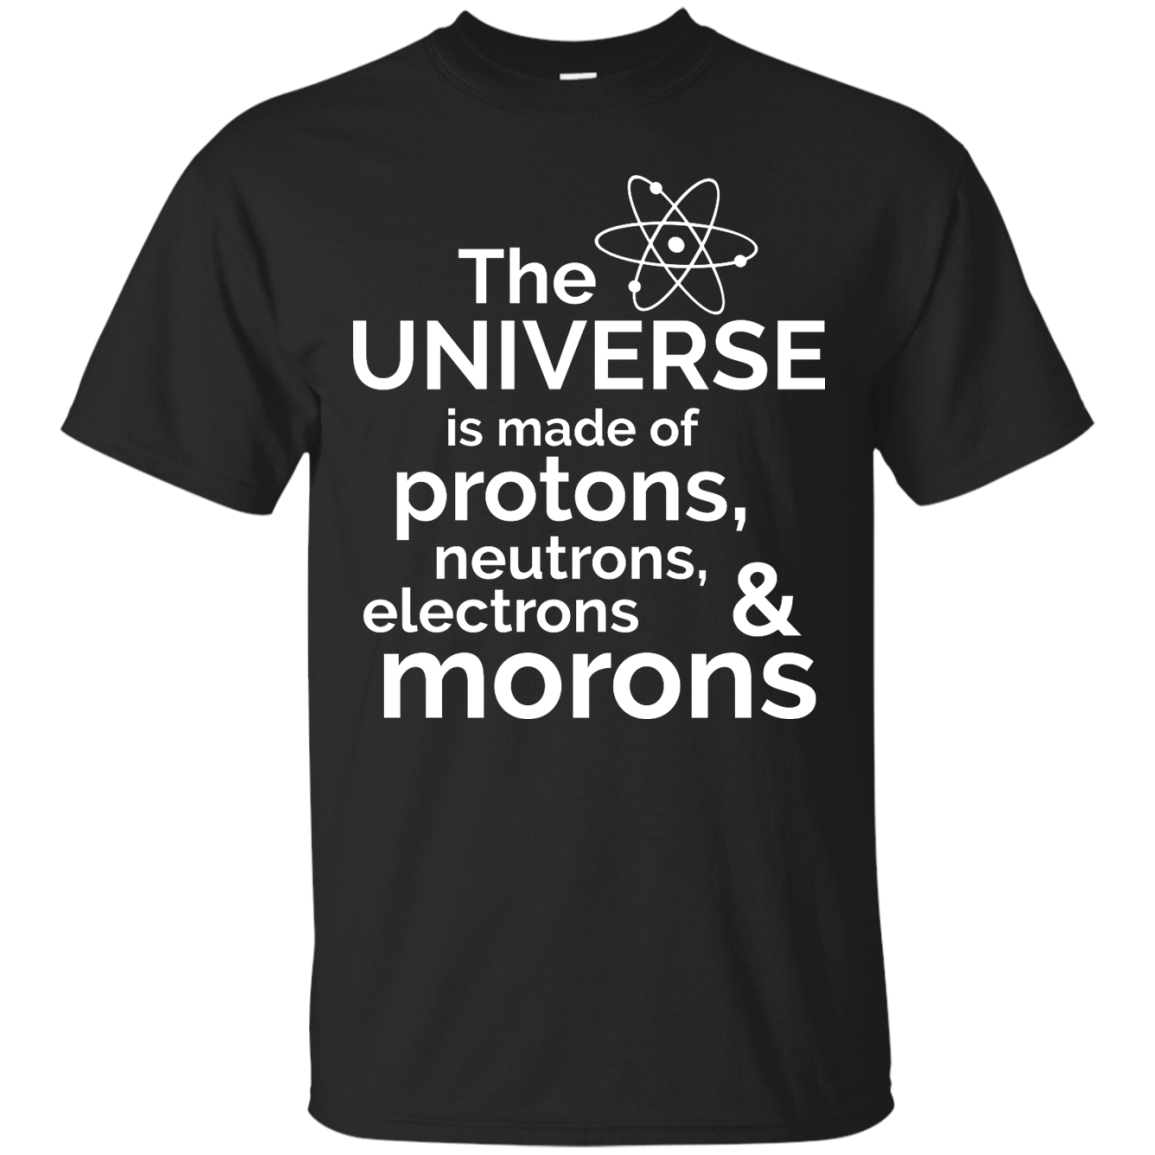 The Universe is made of protons..& morons shirt